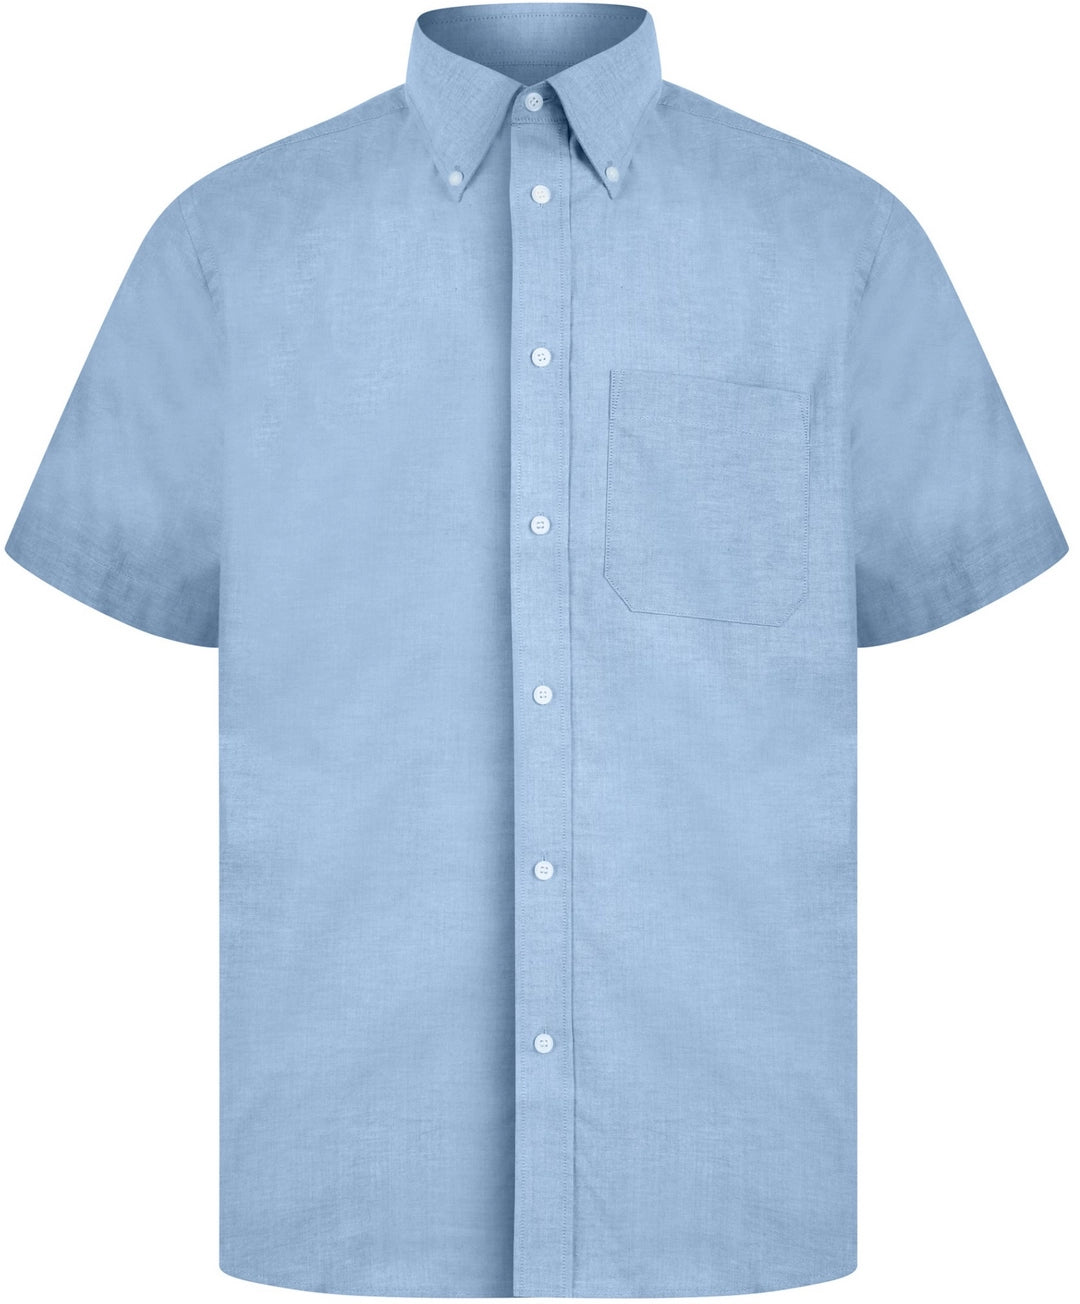 Absolute Apparel AA304 Mens Classic Short Sleeve Oxford Shirt - COOZO